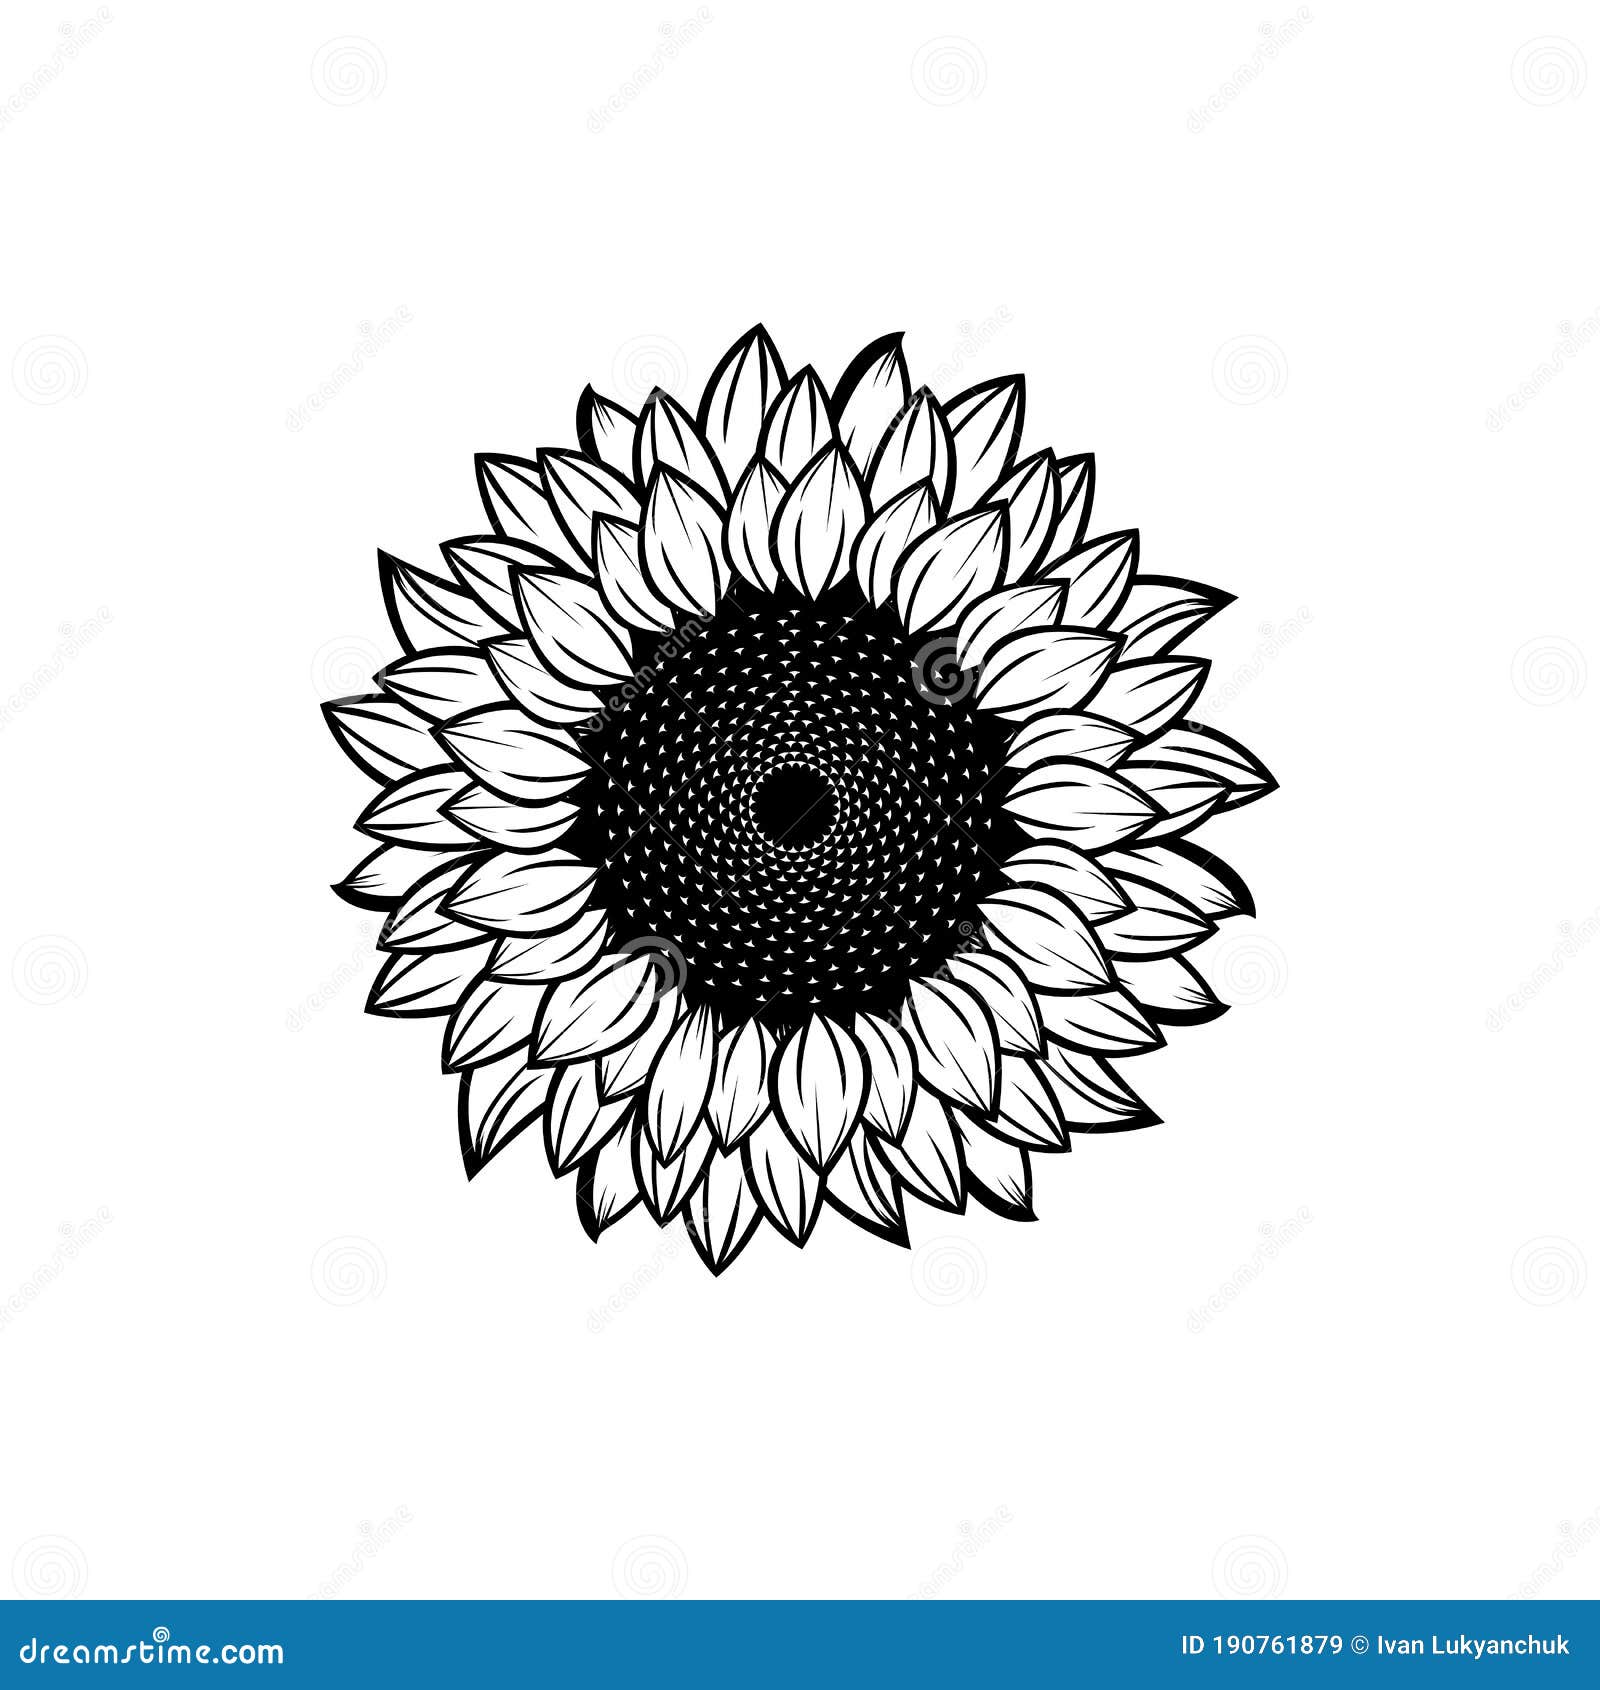 Vintage black and white blooming sunflower flowers concept on white backg.....